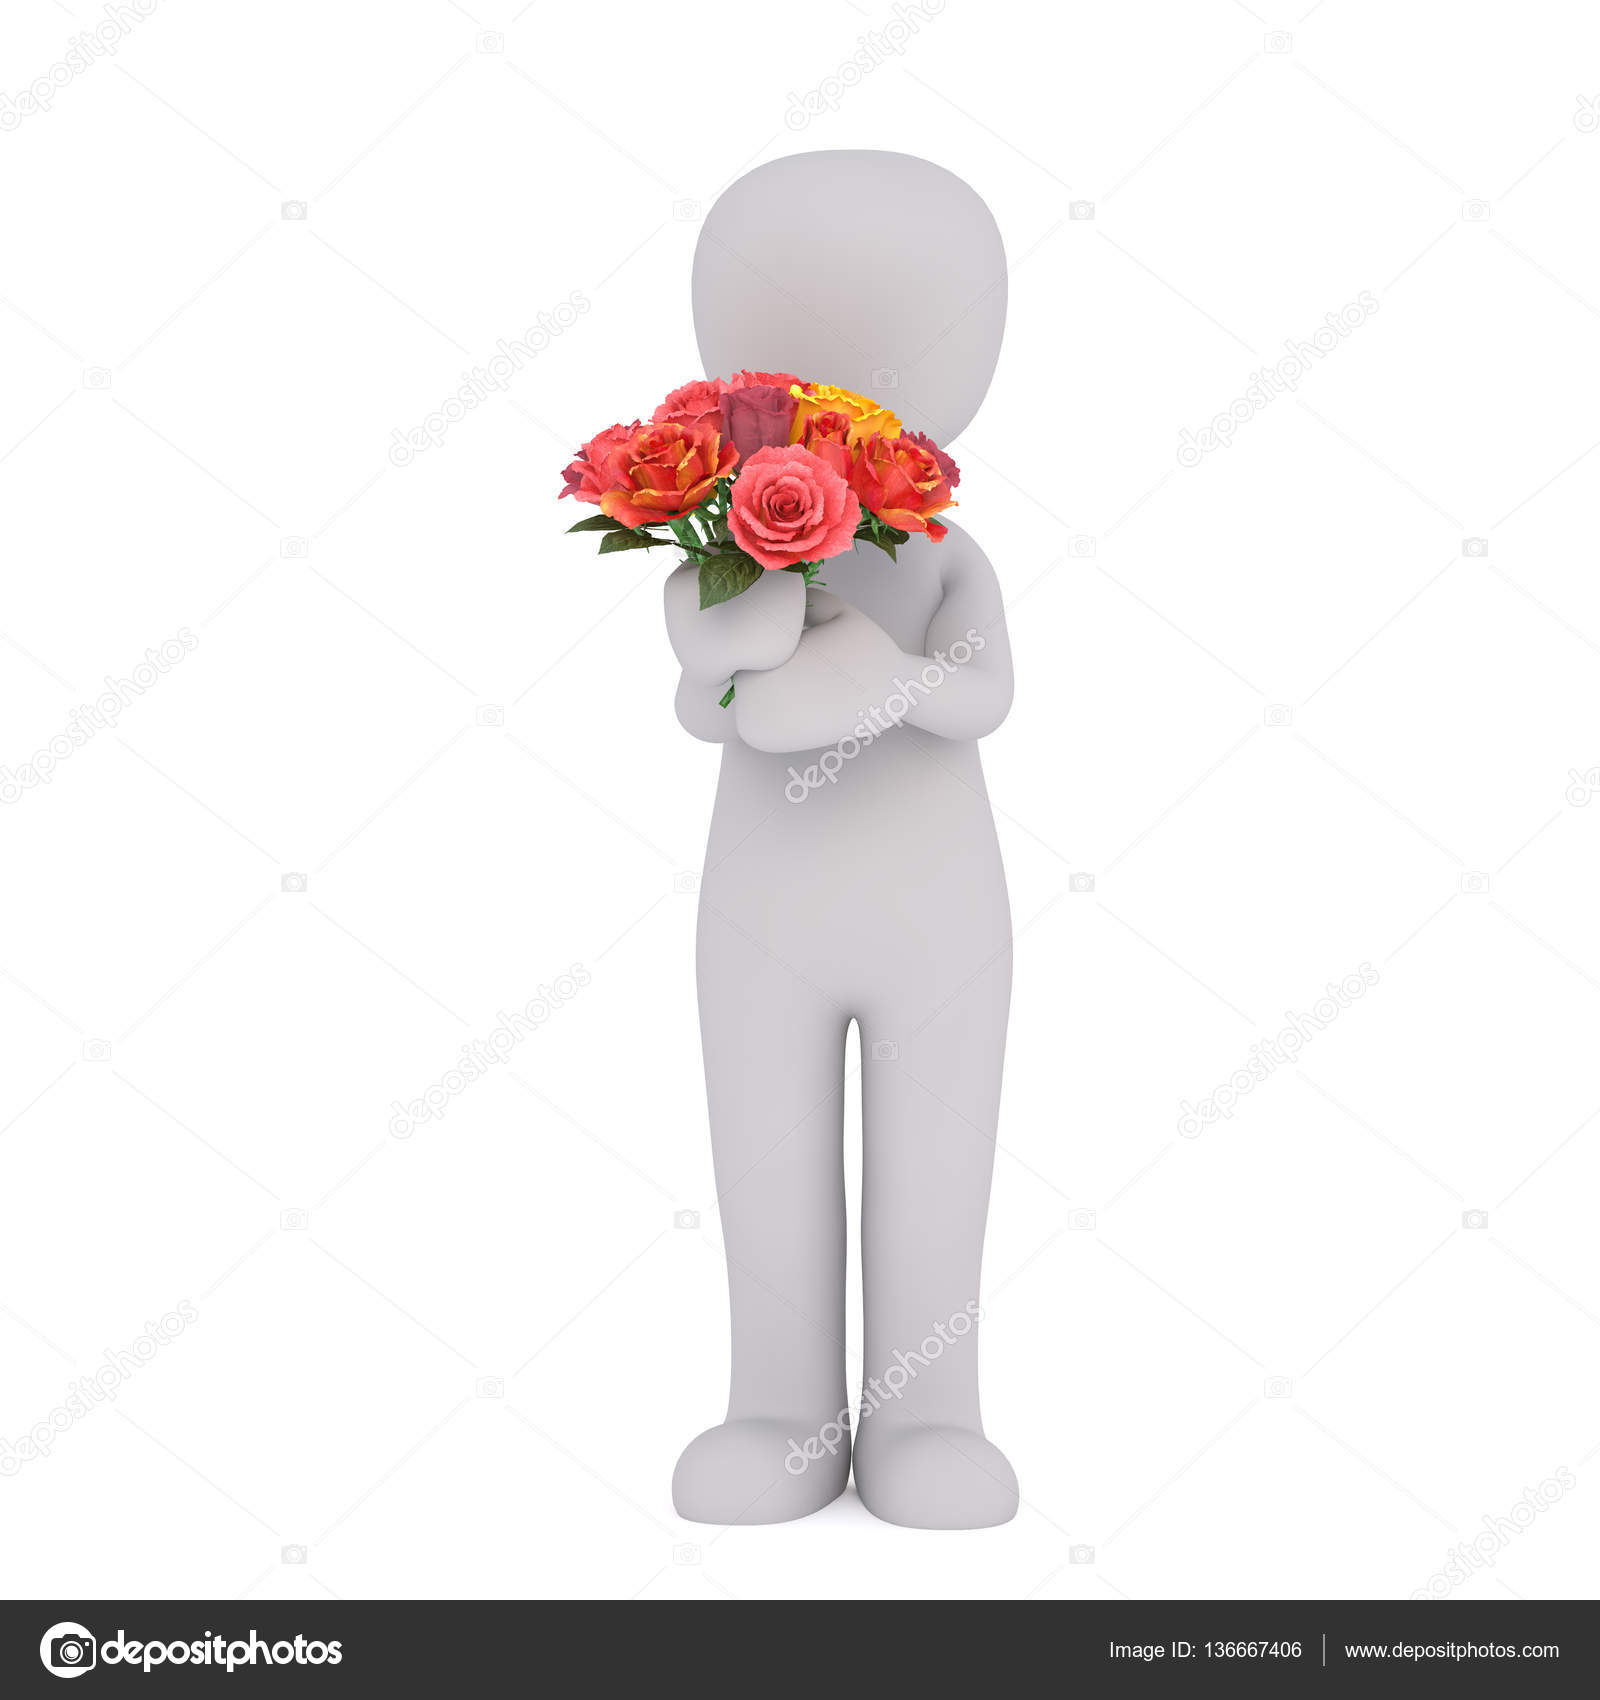 Cartoon Figure Holding Bouquet of Colorful Roses — Stock Photo © 3D ...